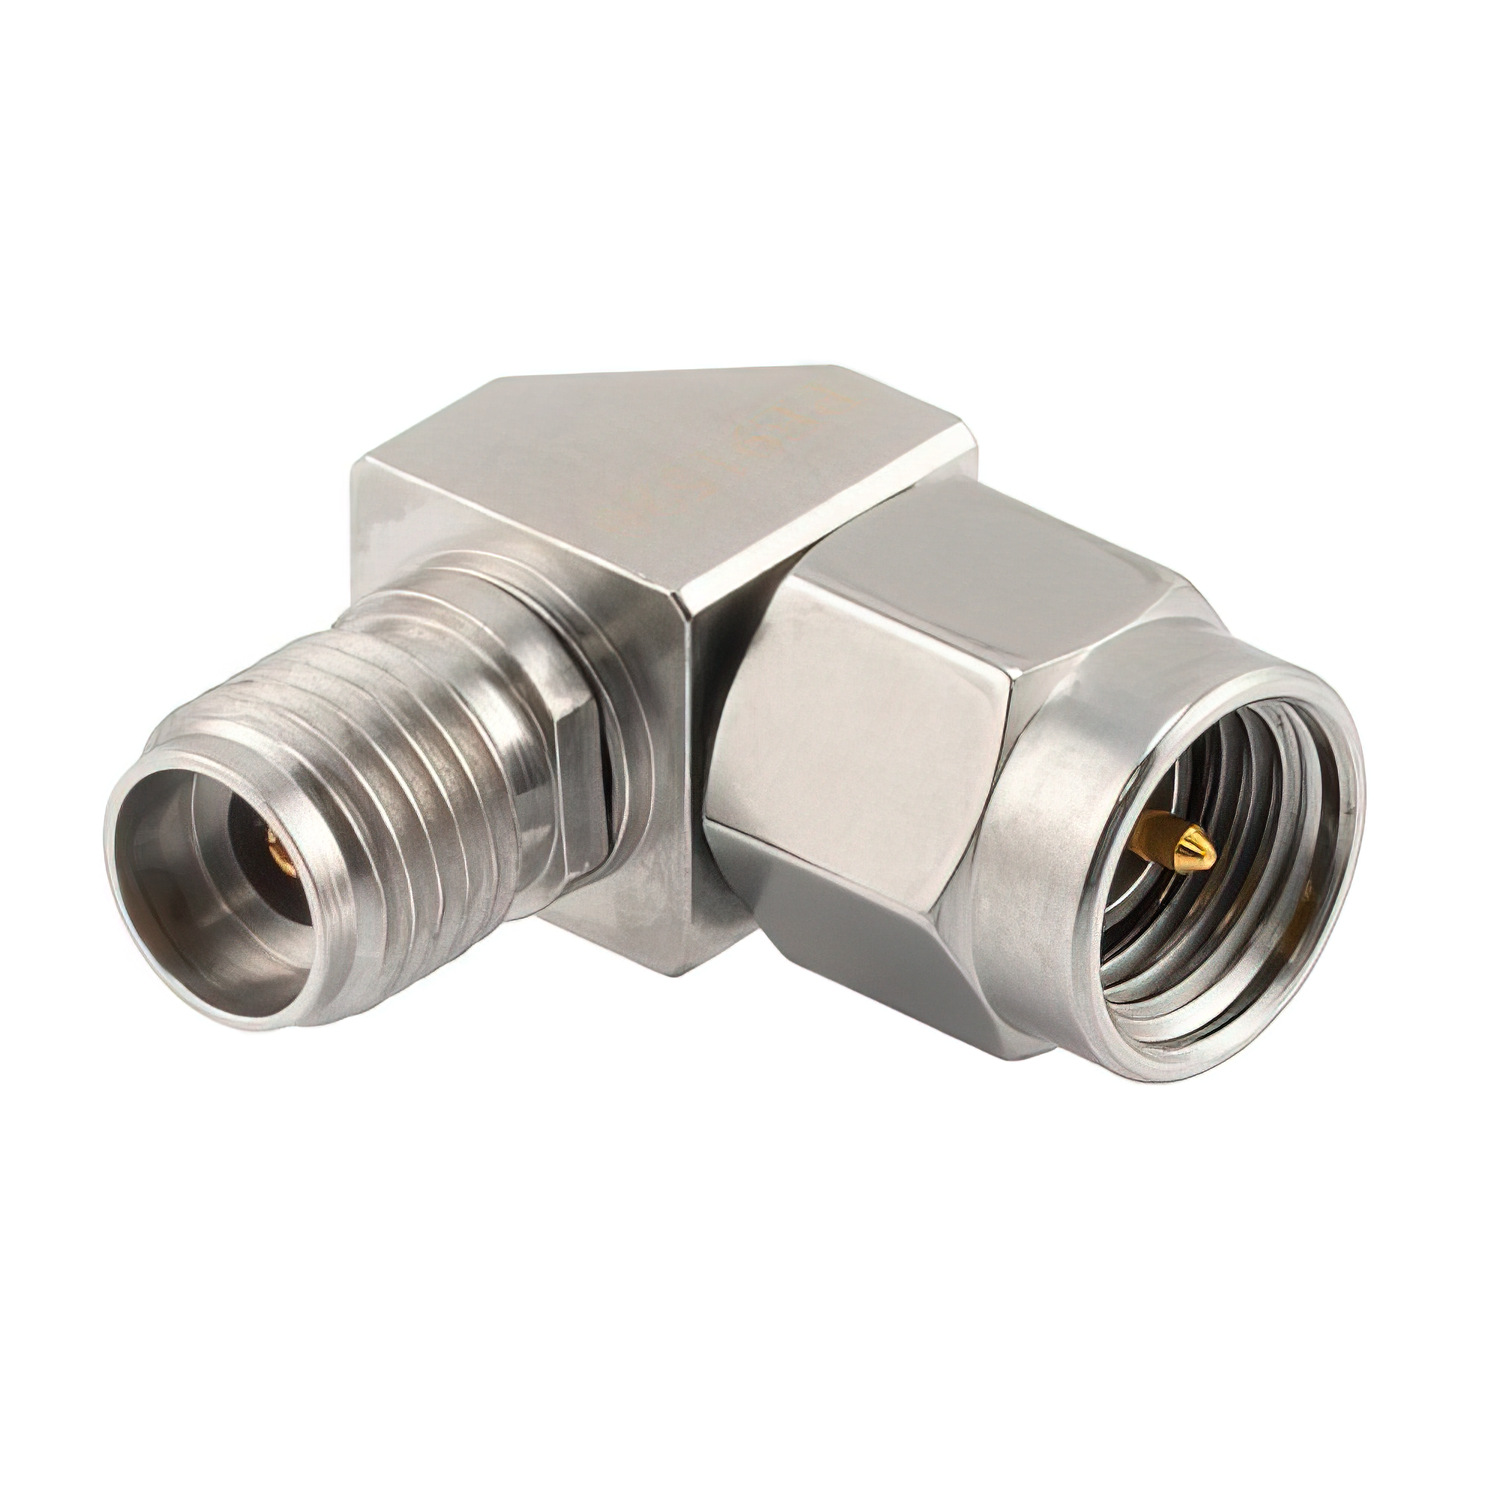 2.92mm Female to 3.5mm Male Miter Right Angle Adapter2